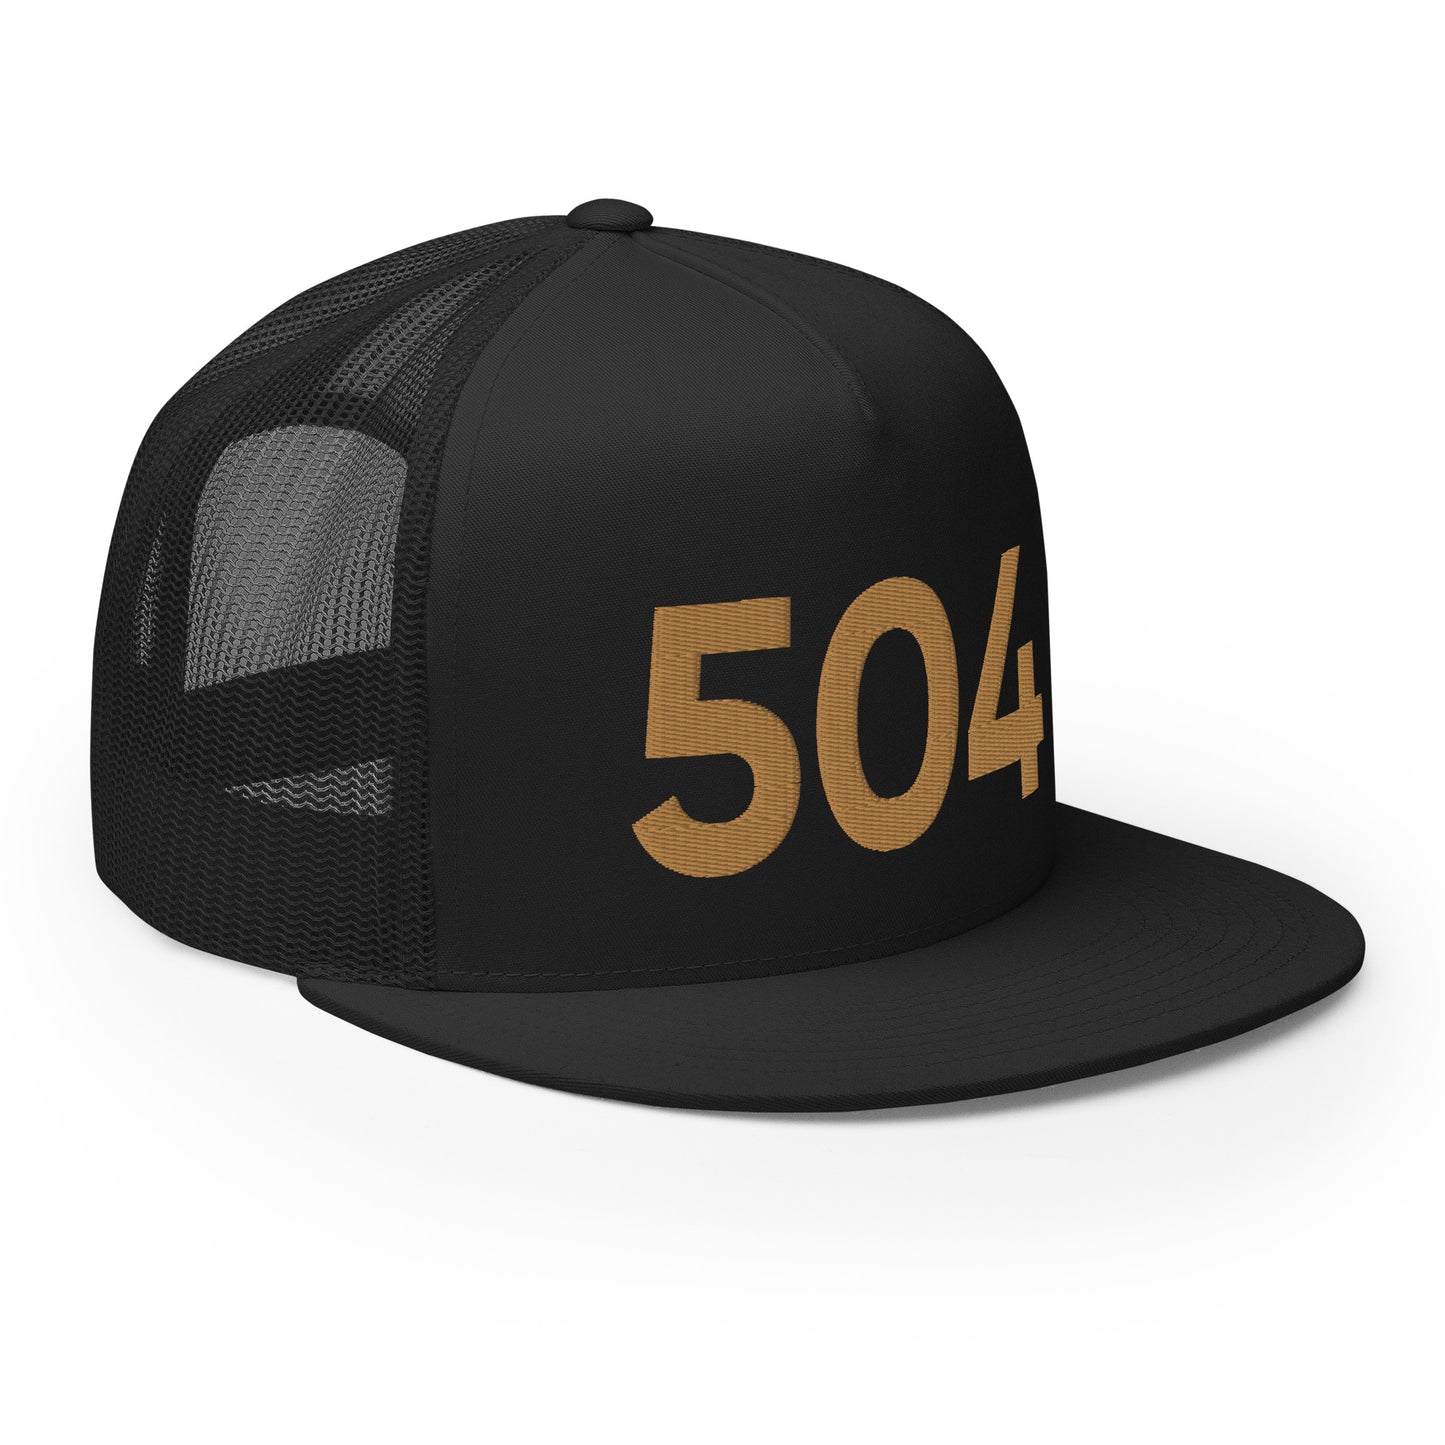 504 New Orleans Strong Trucker Hat